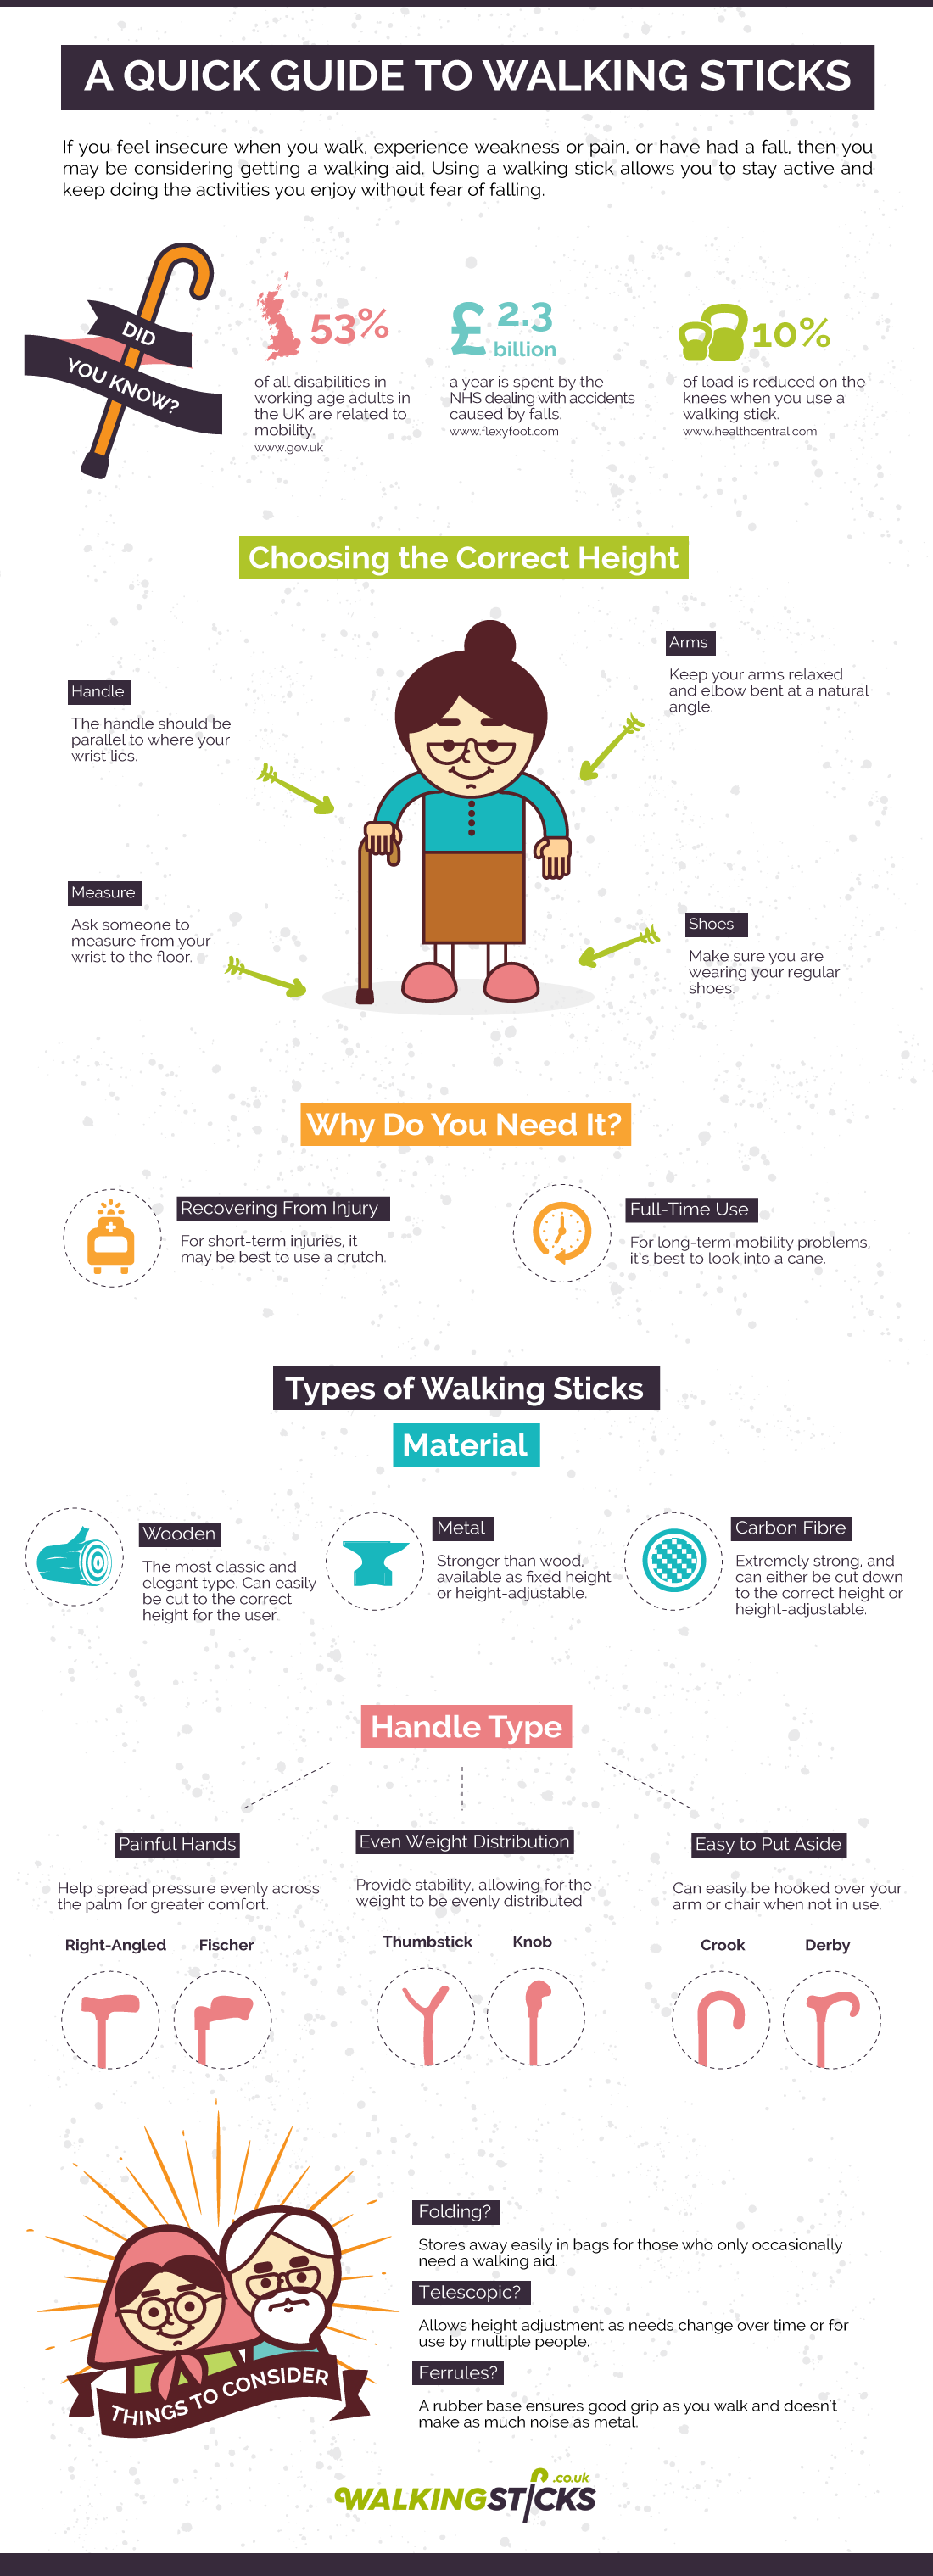 A Quick Guide to Walking Sticks